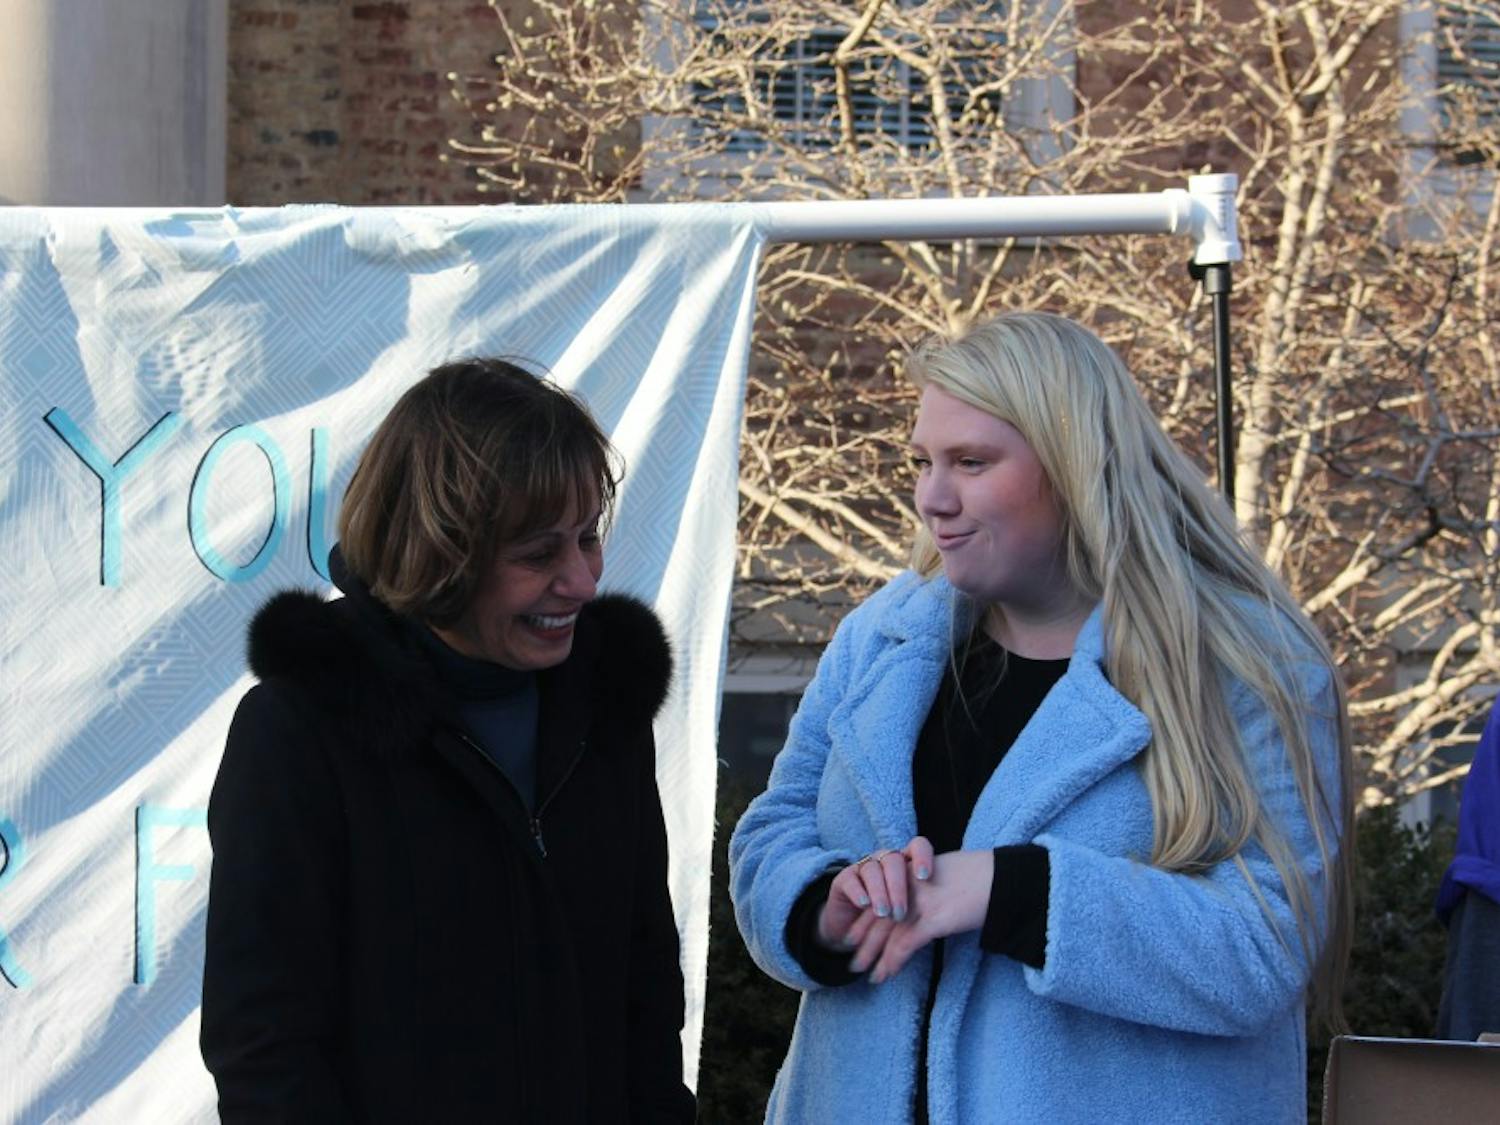 Senior Caroline Bass talks to Chancellor Carol Folt on the steps of South Building on Wednesday, Jan. 30, 2019. Bass organized the goodbye event to thank Folt during her final days at the university.